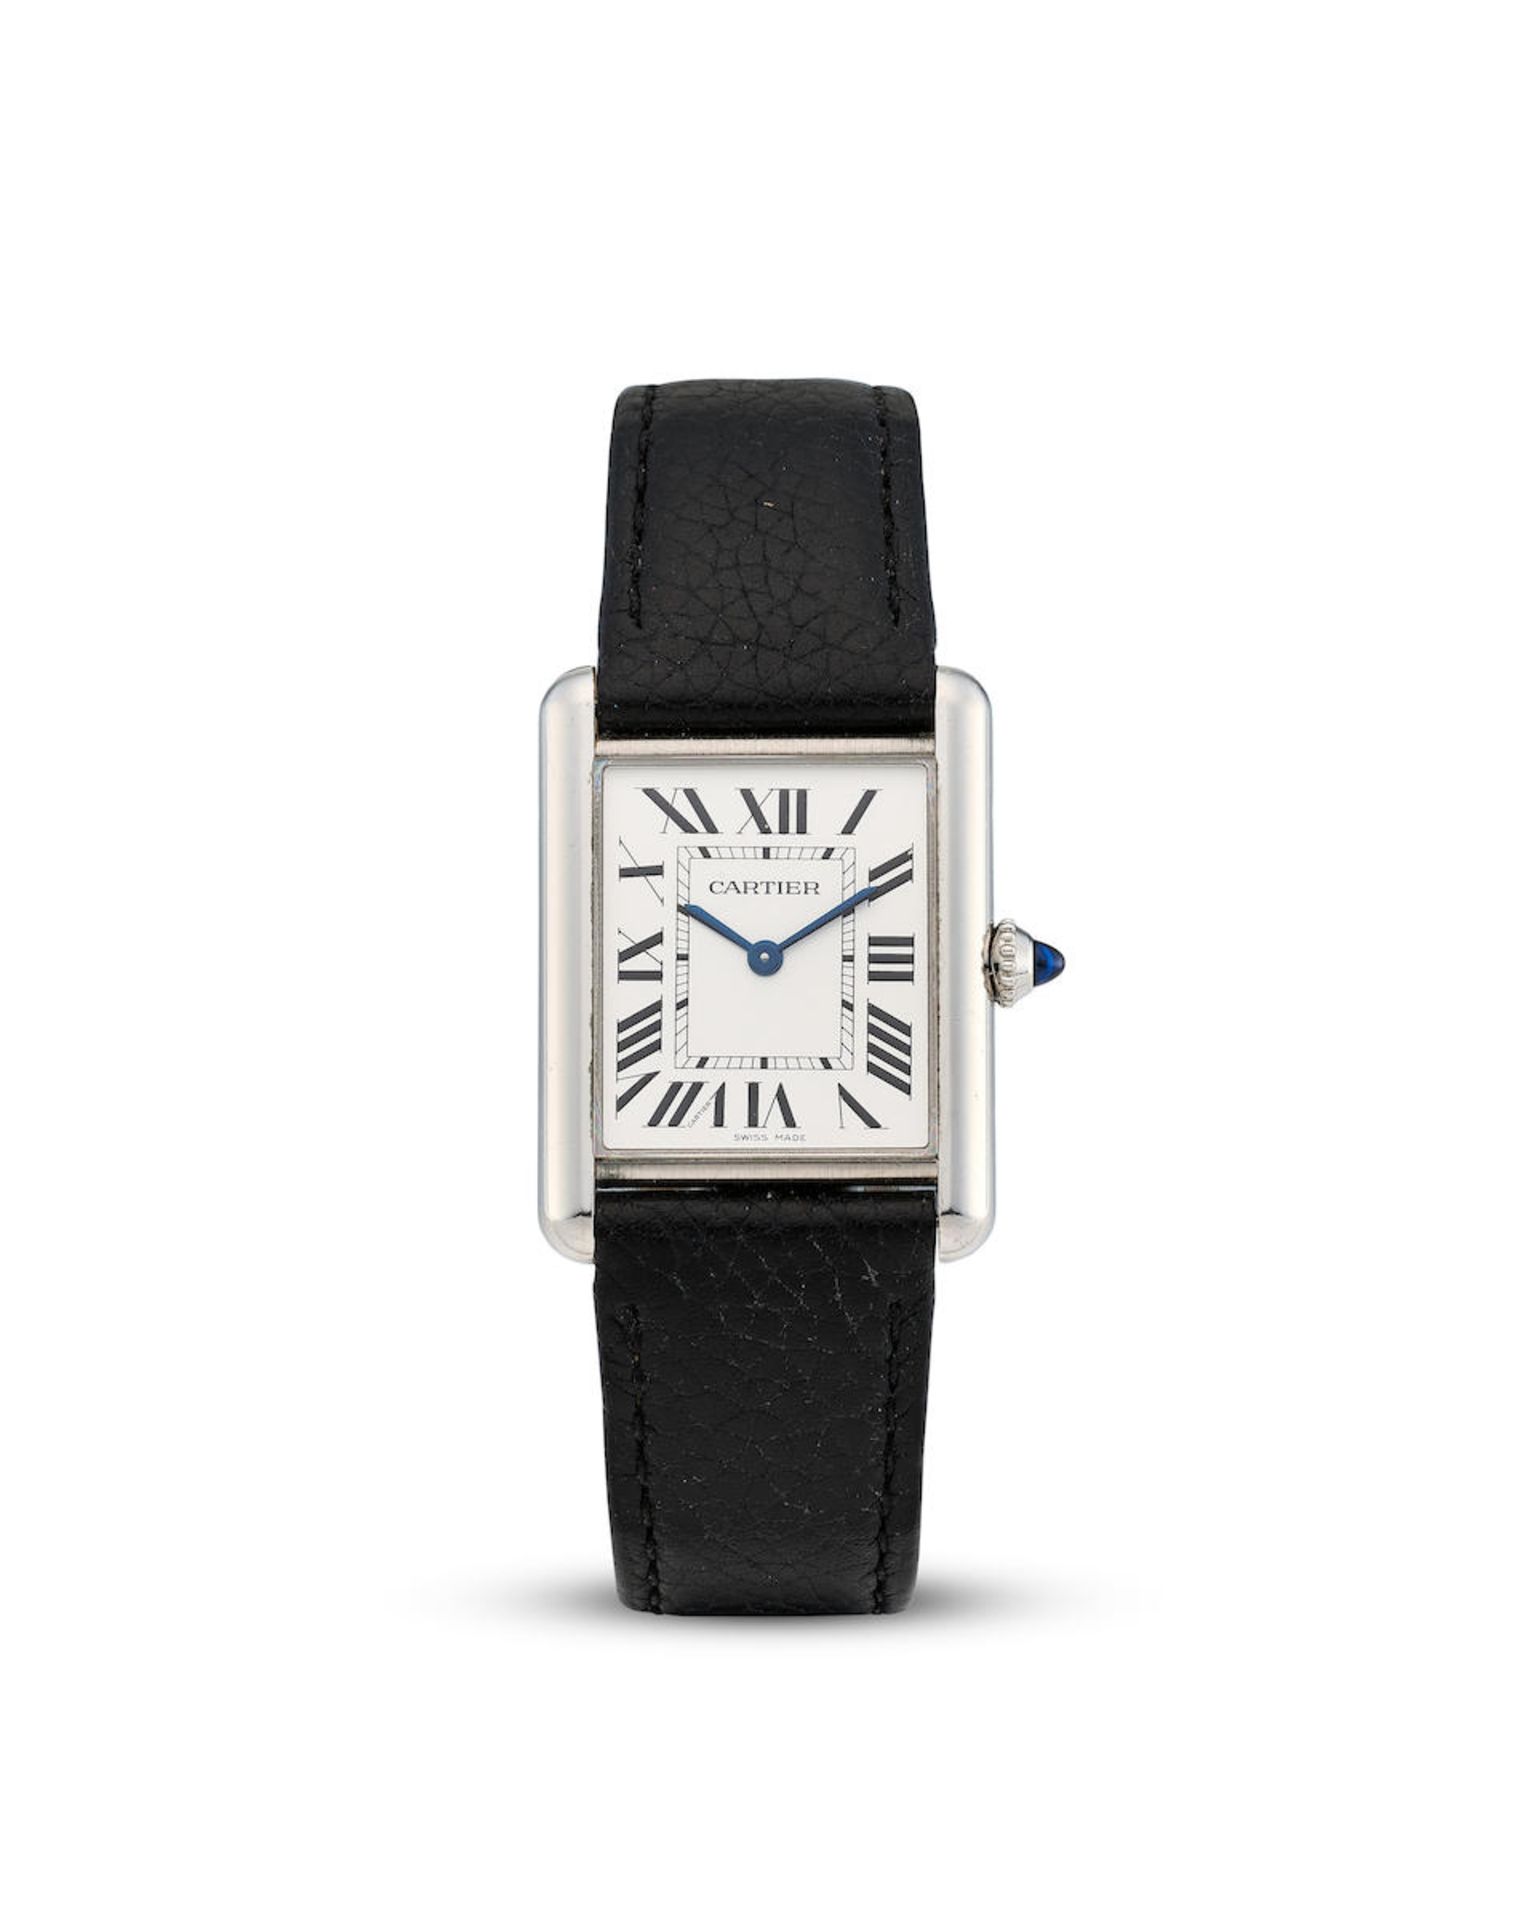 [NO RESERVE] CARTIER | TANK MUST, REF.WSTA0041, A STAINLESS STEEL WRISTWATCH, CIRCA 2021 - Image 2 of 5